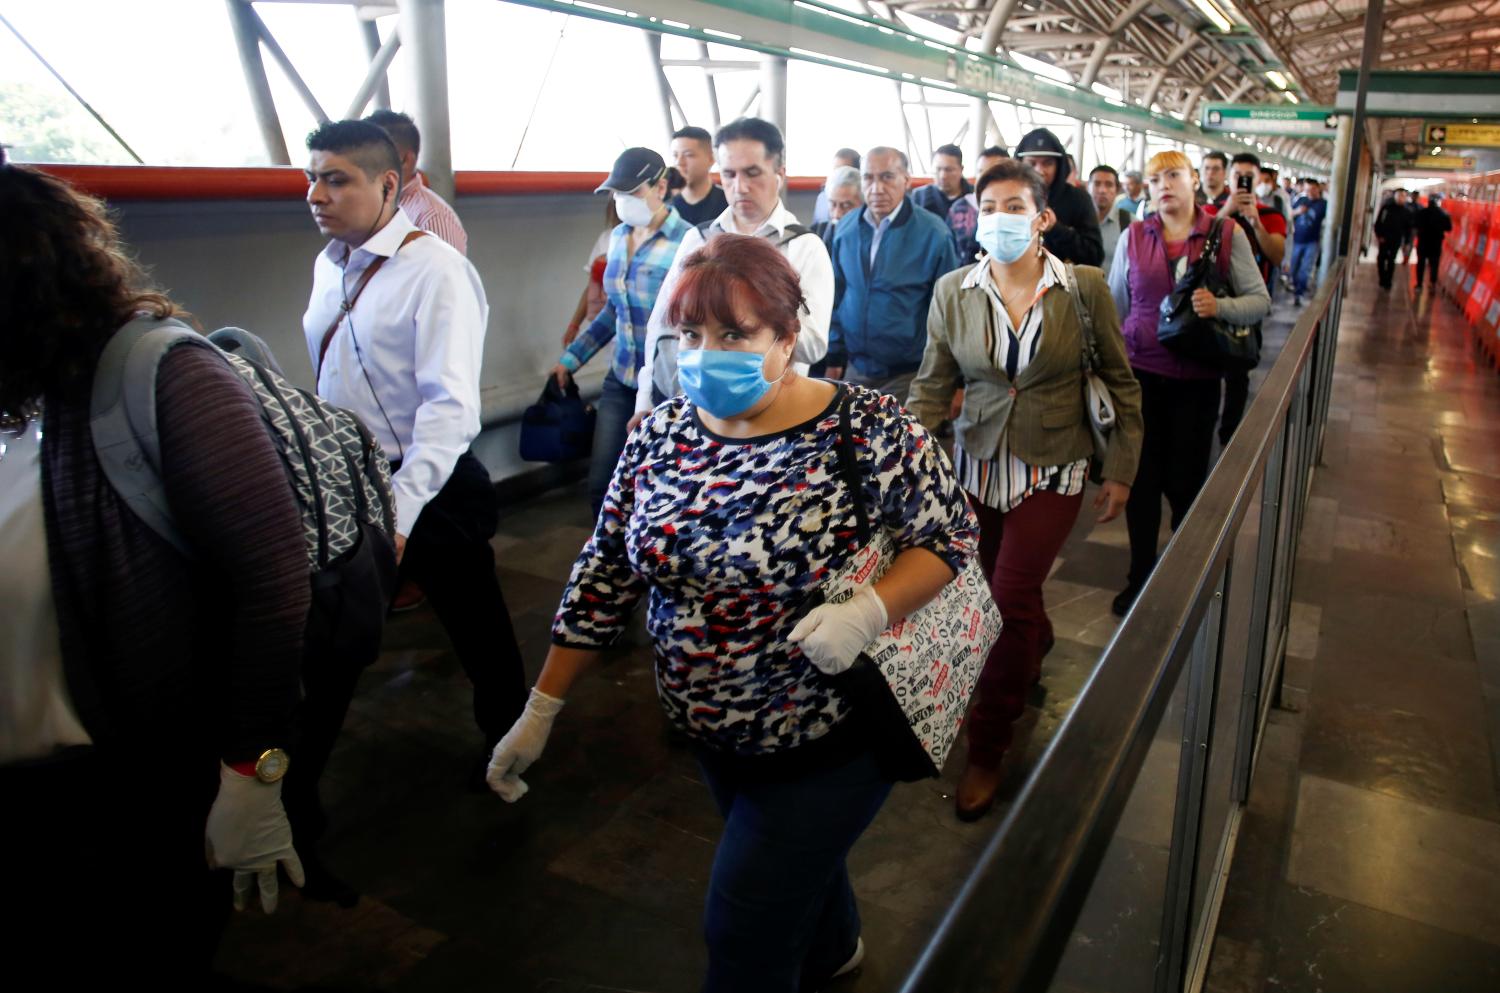 A commuter wearing a protective face mask walks inside metro installations as the outbreak of coronavirus disease (COVID-19) continues, in Mexico City, Mexico March 24, 2020. REUTERS/Gustavo Graf